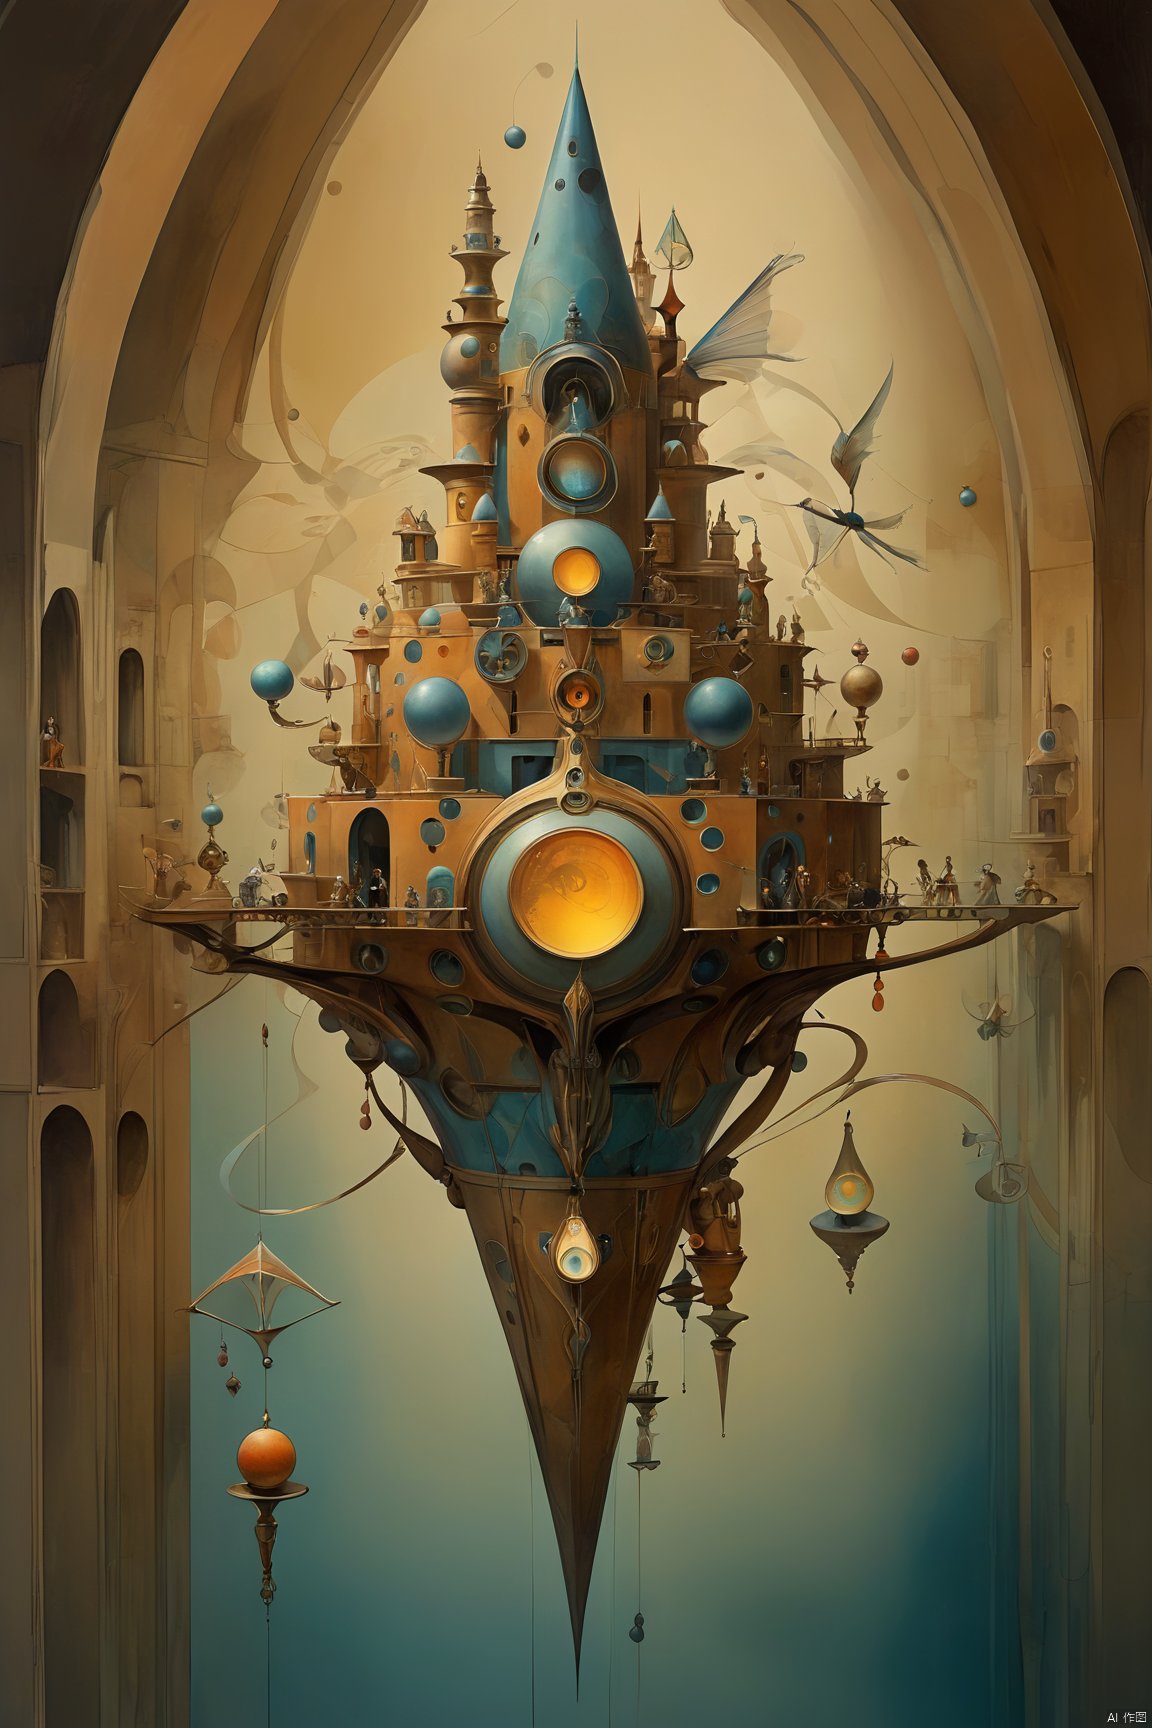  artfshnshtr, fuse M.C. Escher's geometric illusions with Anne Bachelier's enchanting characters. Prioritize the depiction of Bachelier's whimsical characters, Utilize Escher's intricate linework to create fantastical settings, while Bachelier's vibrant oil paintings breathe life into her characters. Infuse the dreamworld with the mystical essence of DMT or Ayahuasca, amplifying the ethereal energy and inviting immersive exploration centered around Bachelier's captivating characters, artchlr